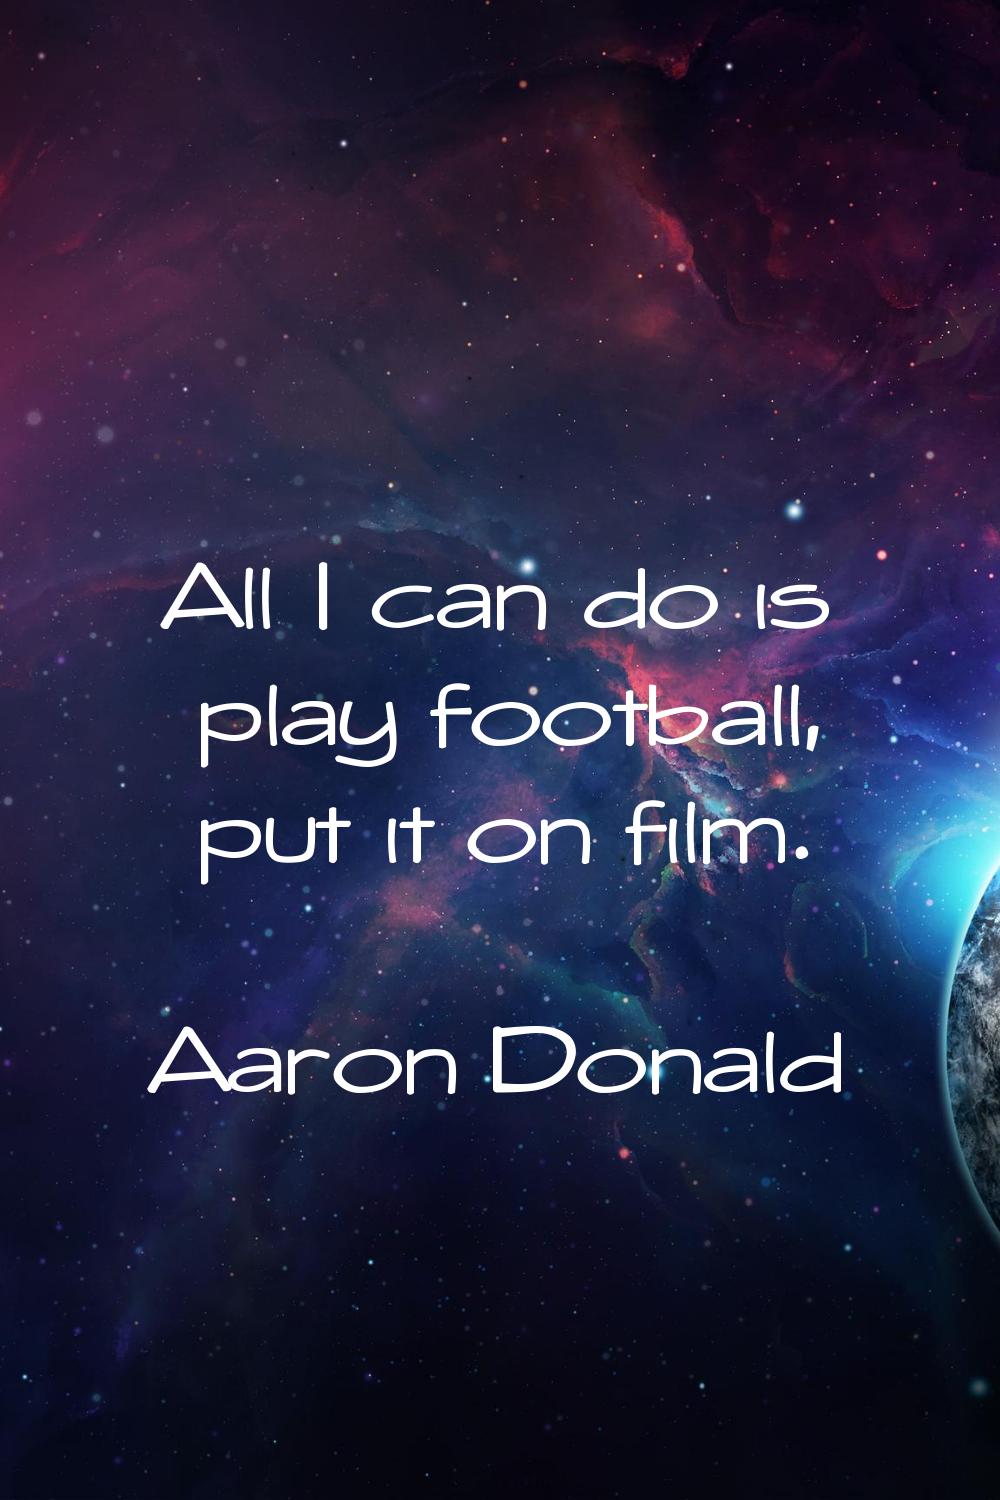 All I can do is play football, put it on film.